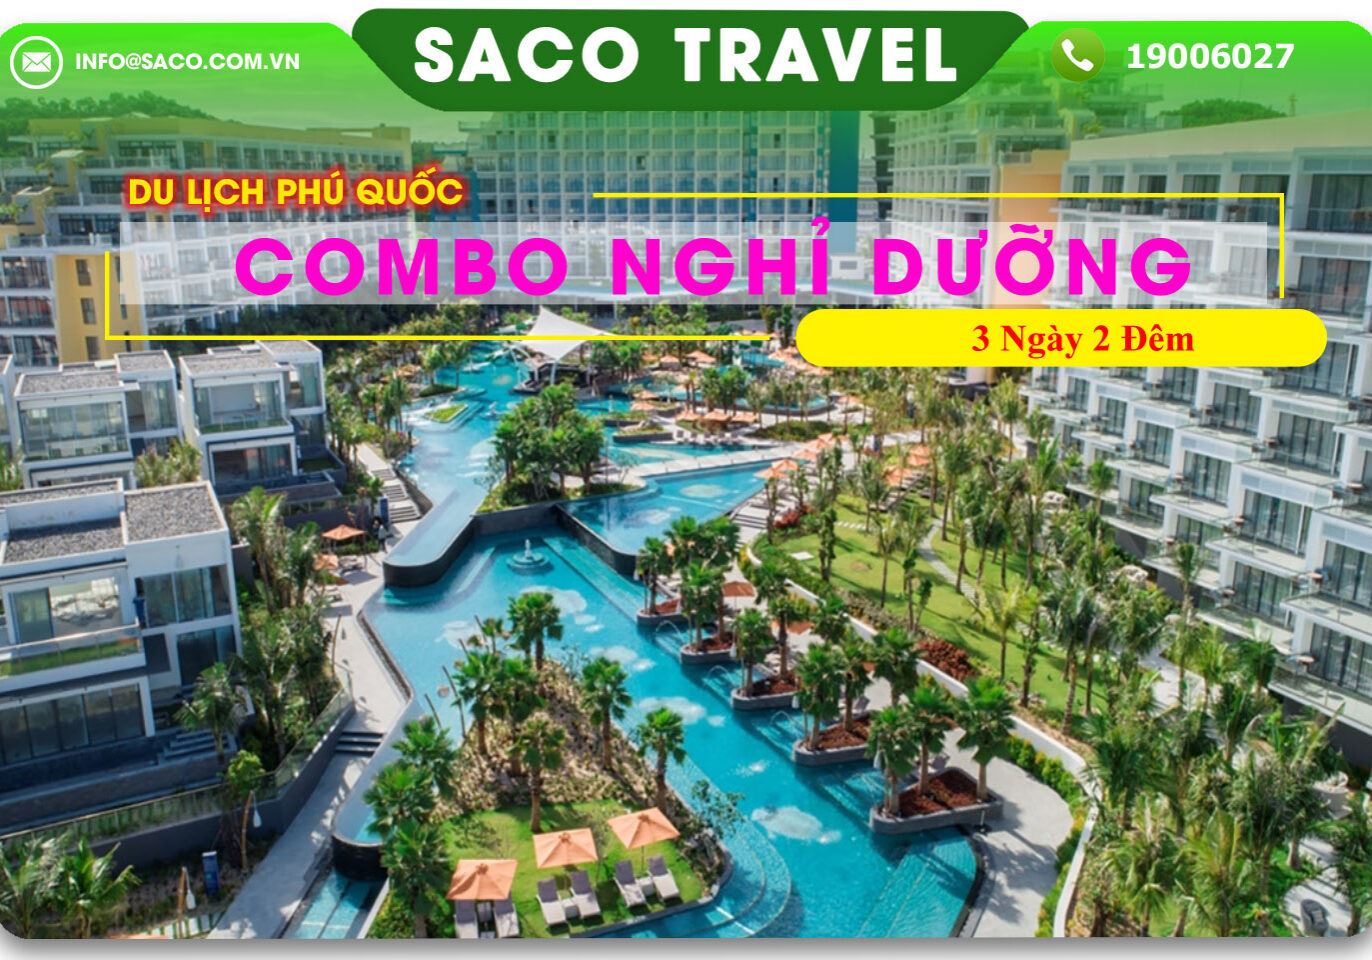 FREE-AND-EASY-PHU-QUOC